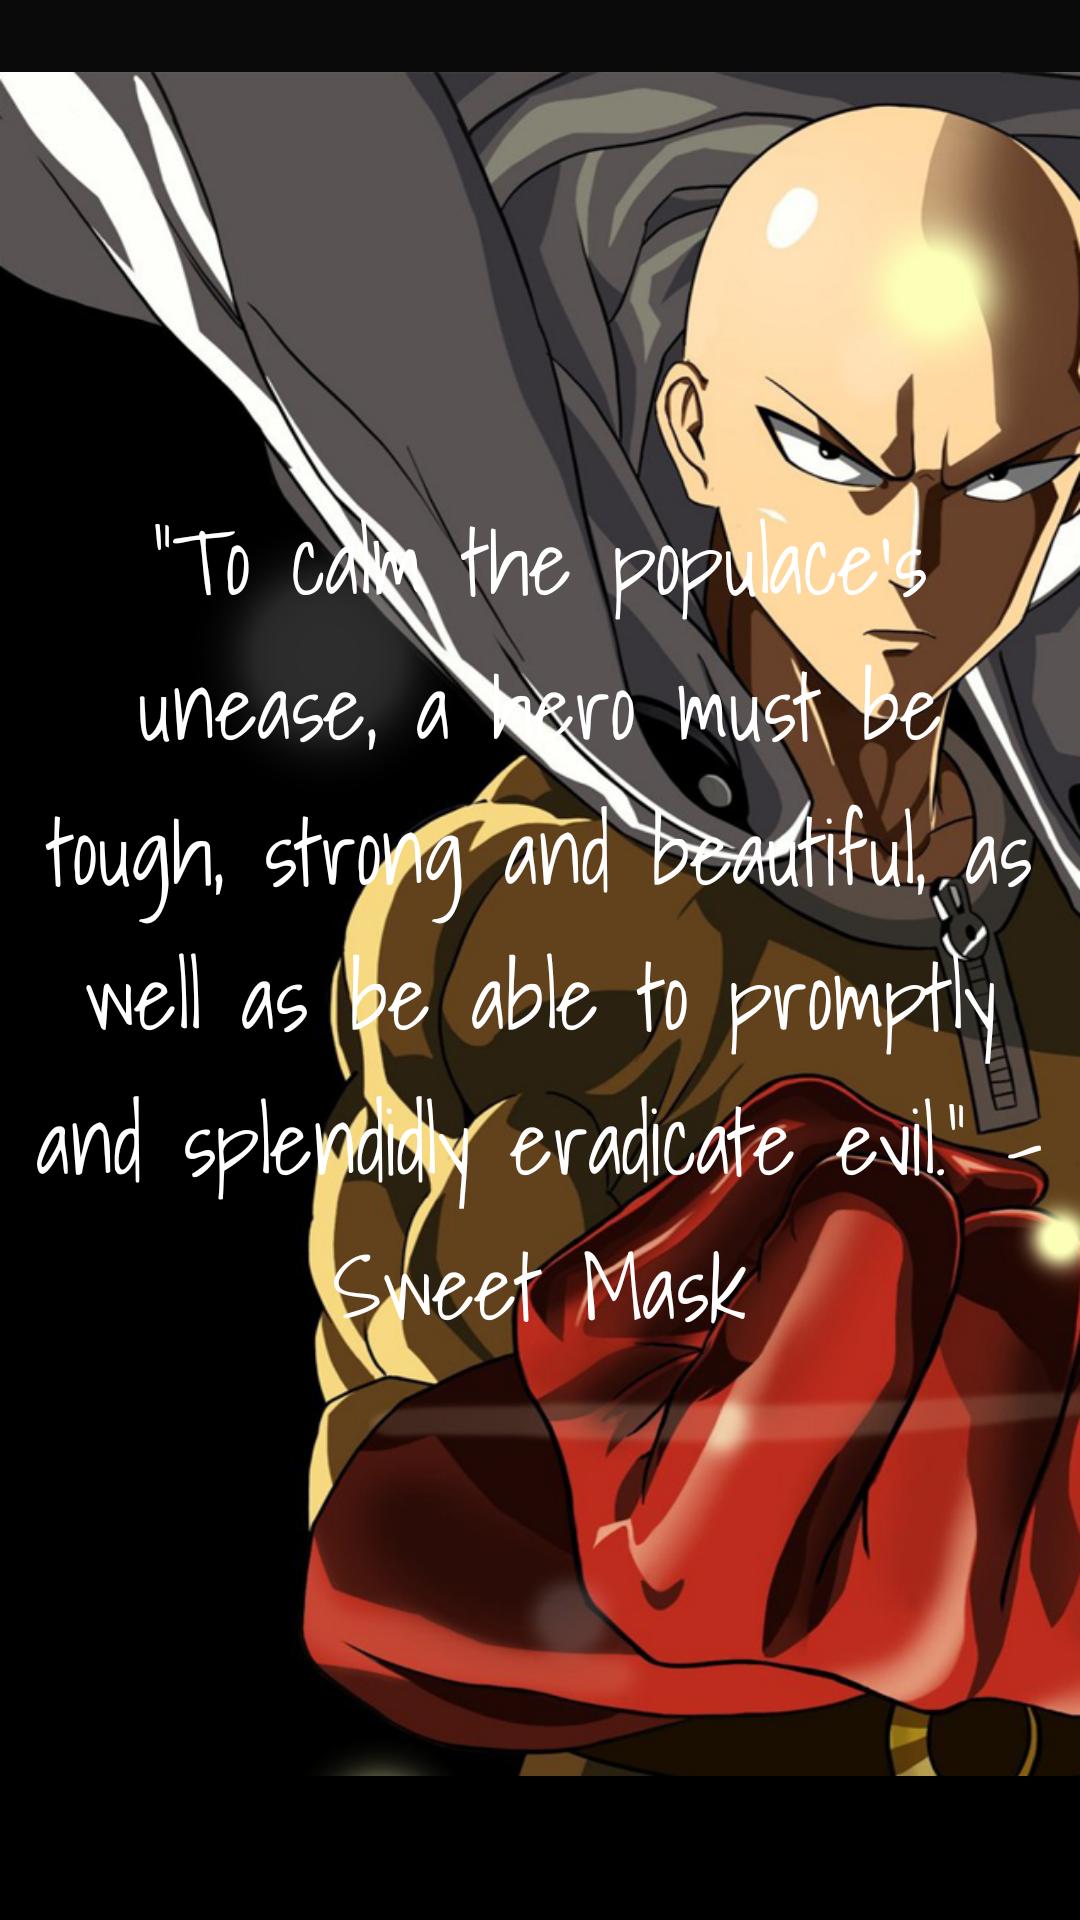 Anime Quotes for Android - APK Download